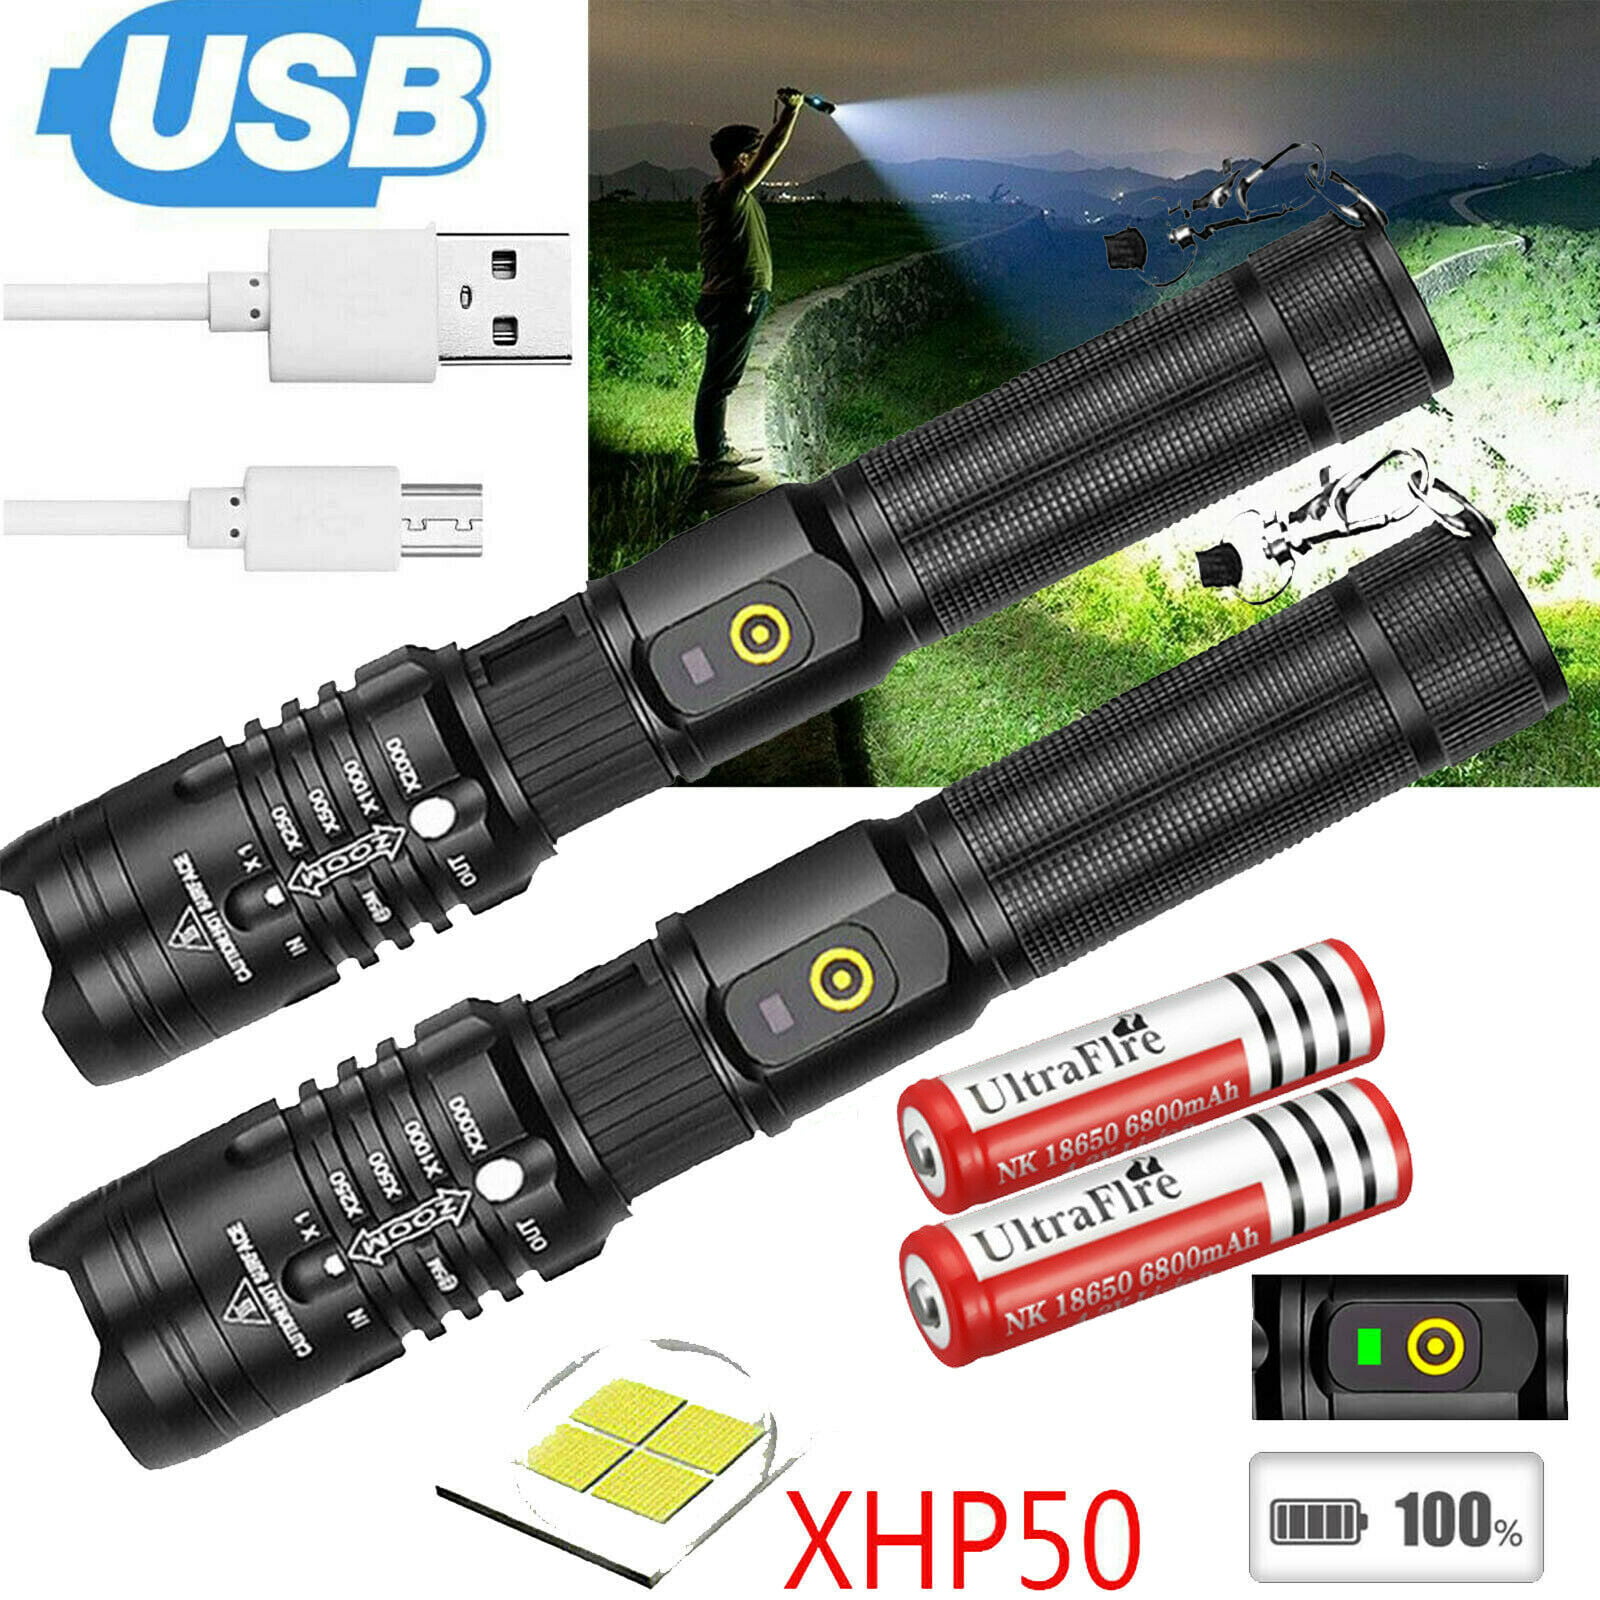 Super Bright Rechargeable USB Mini LED Torch With Beam Focusing Flashlight 18650 